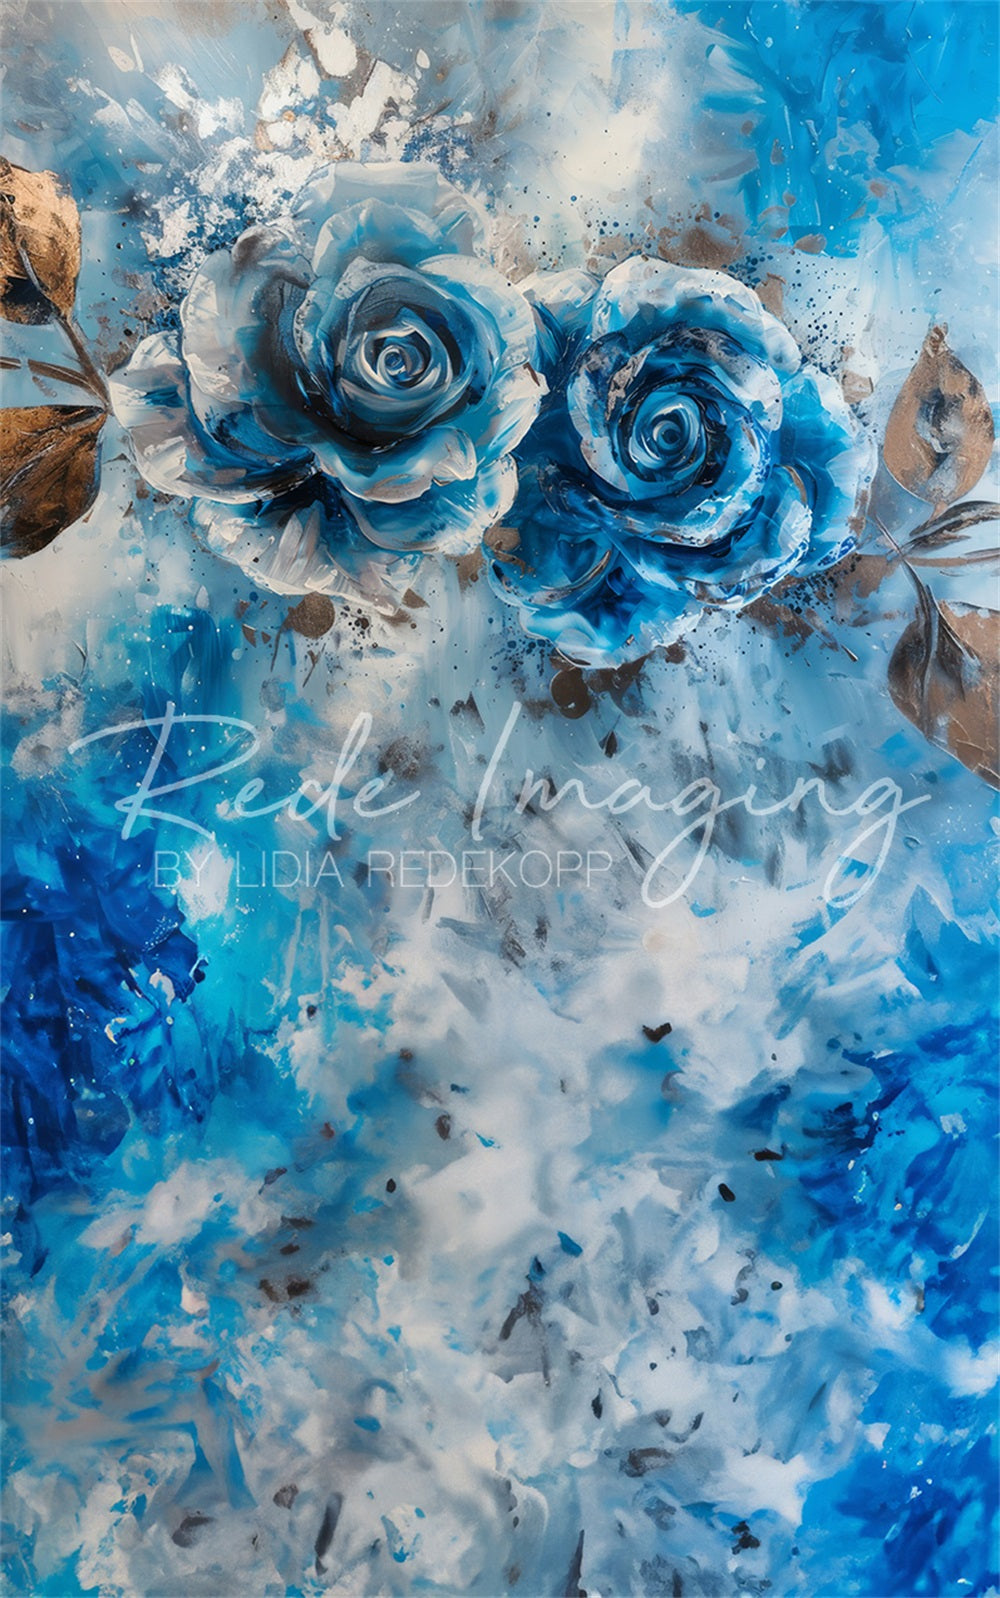 Kate Sweep Abstract Fine Art Blue and Silver Graffiti Rose Wall Backdrop Designed by Lidia Redekopp